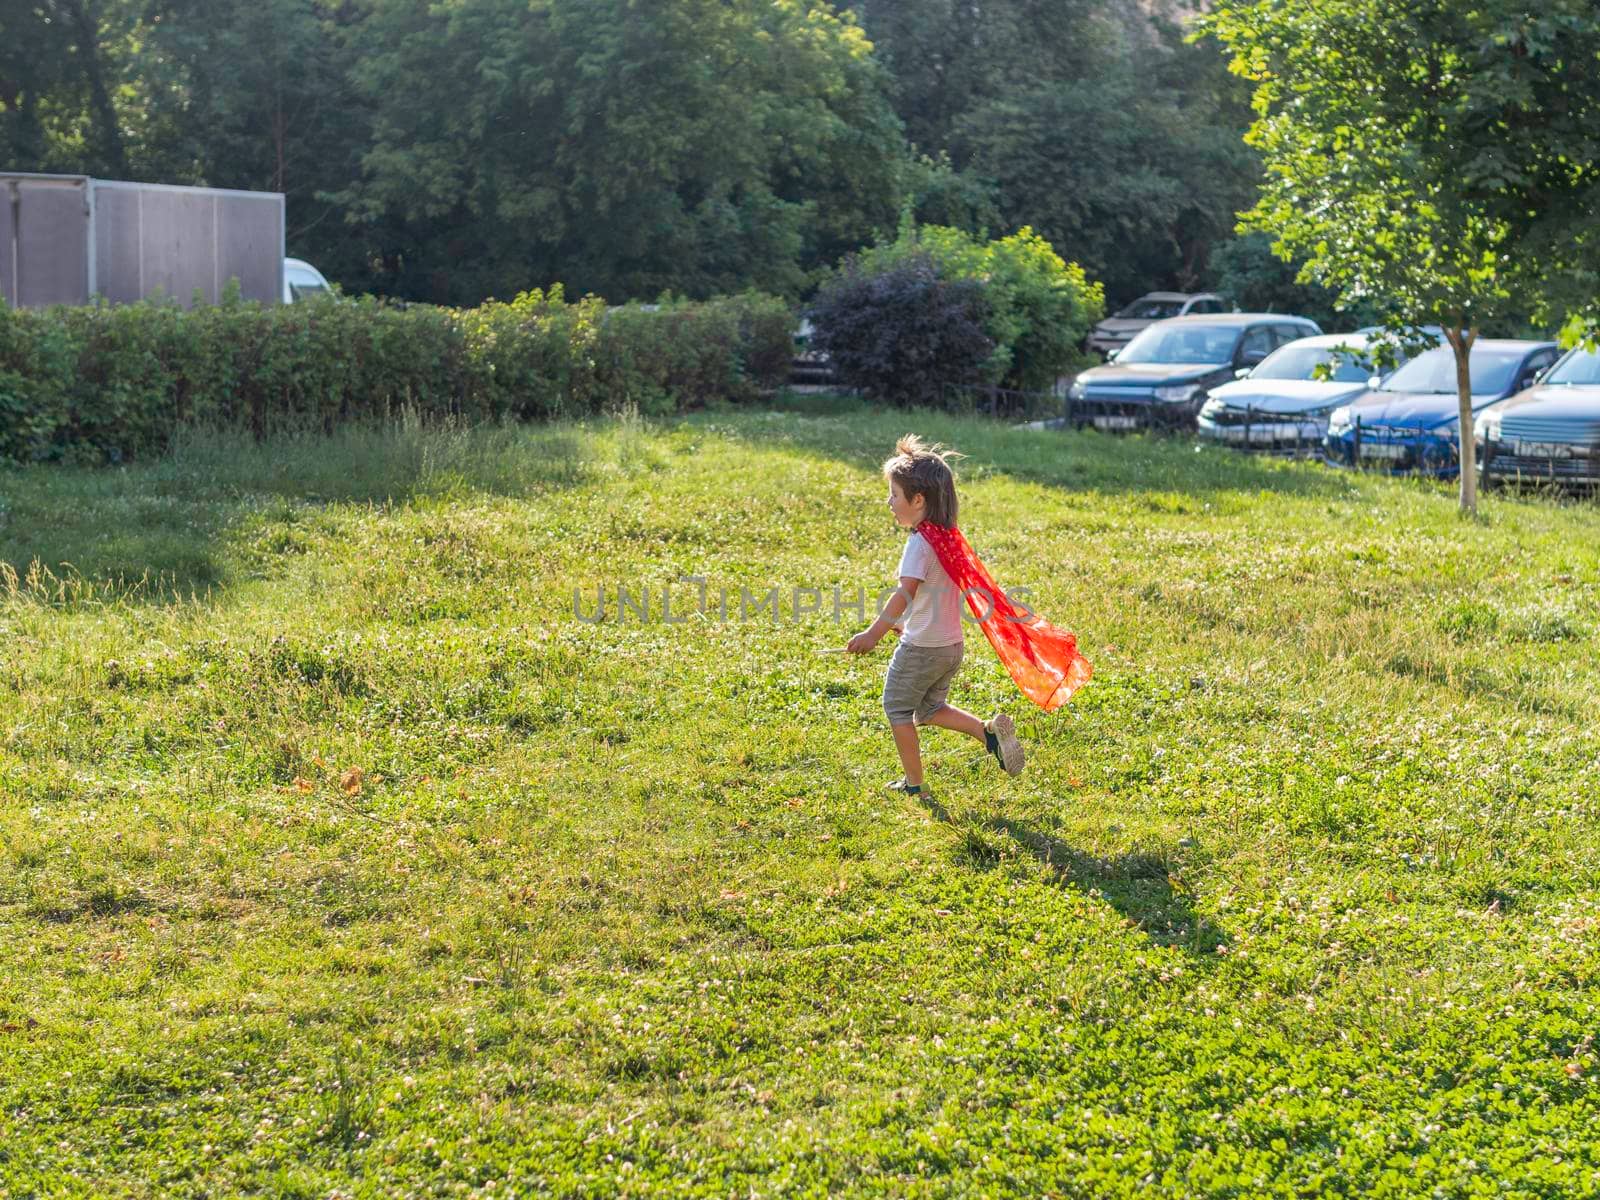 Little boy is playing superhero on lawn. Kid in handmade bright red cloak. Outdoor role-playing game. Costume play at sunlight.